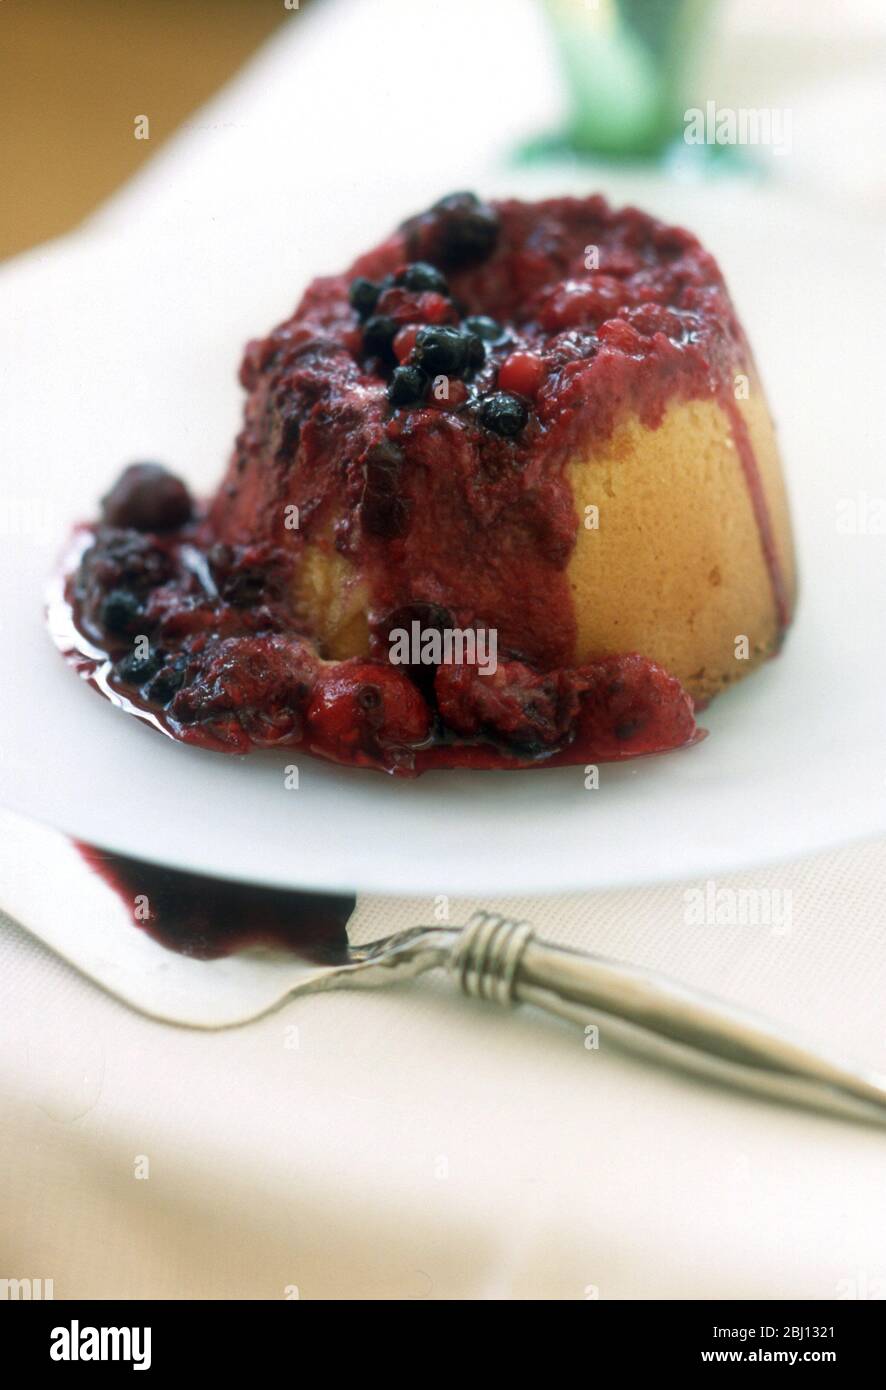 Steamed pudding and fruit - Stock Photo